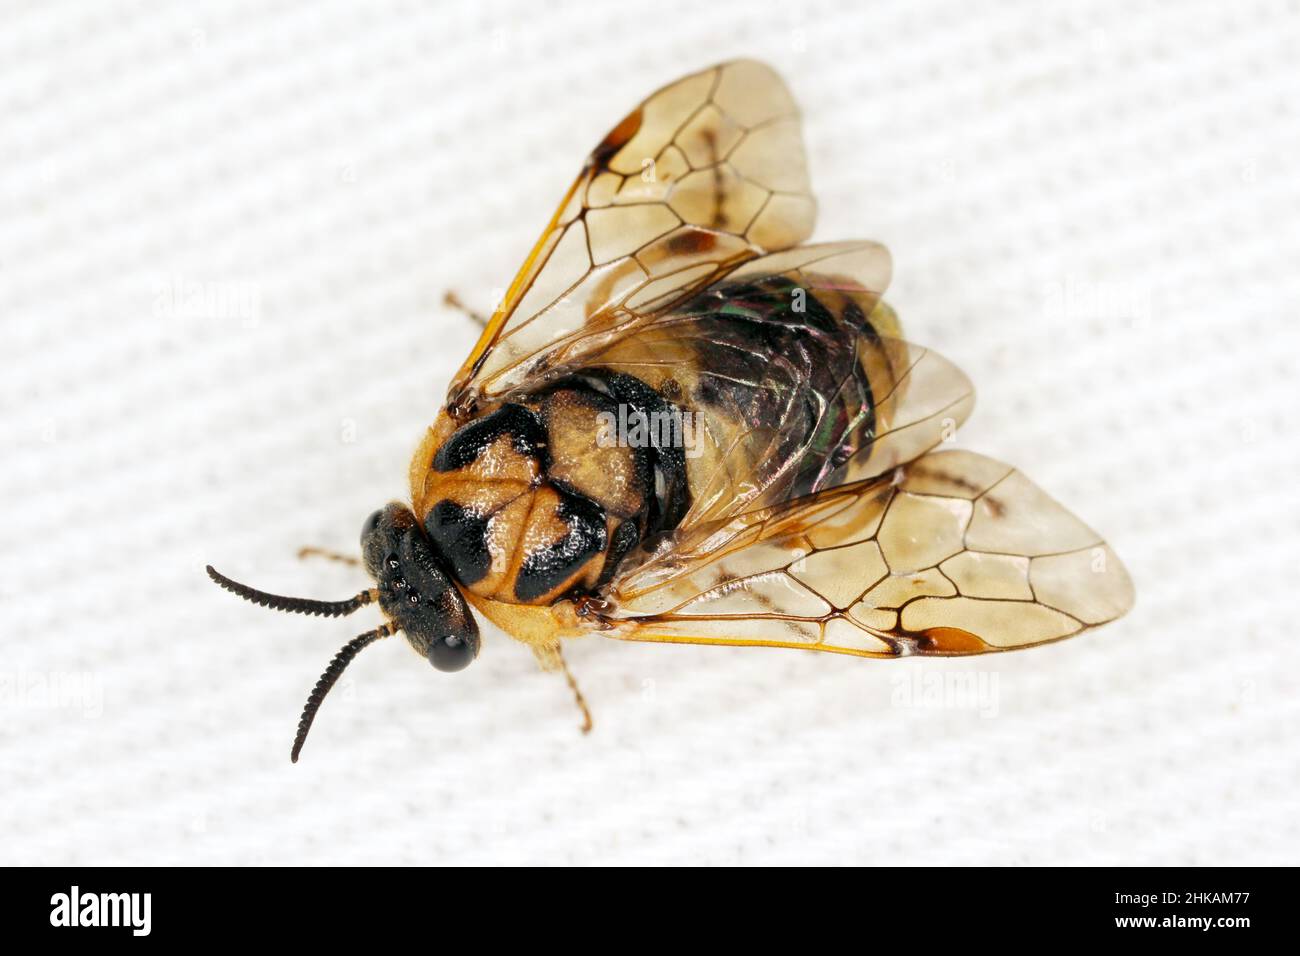 Adult of Scarce Pine Sawfly (Diprion similis). Stock Photo